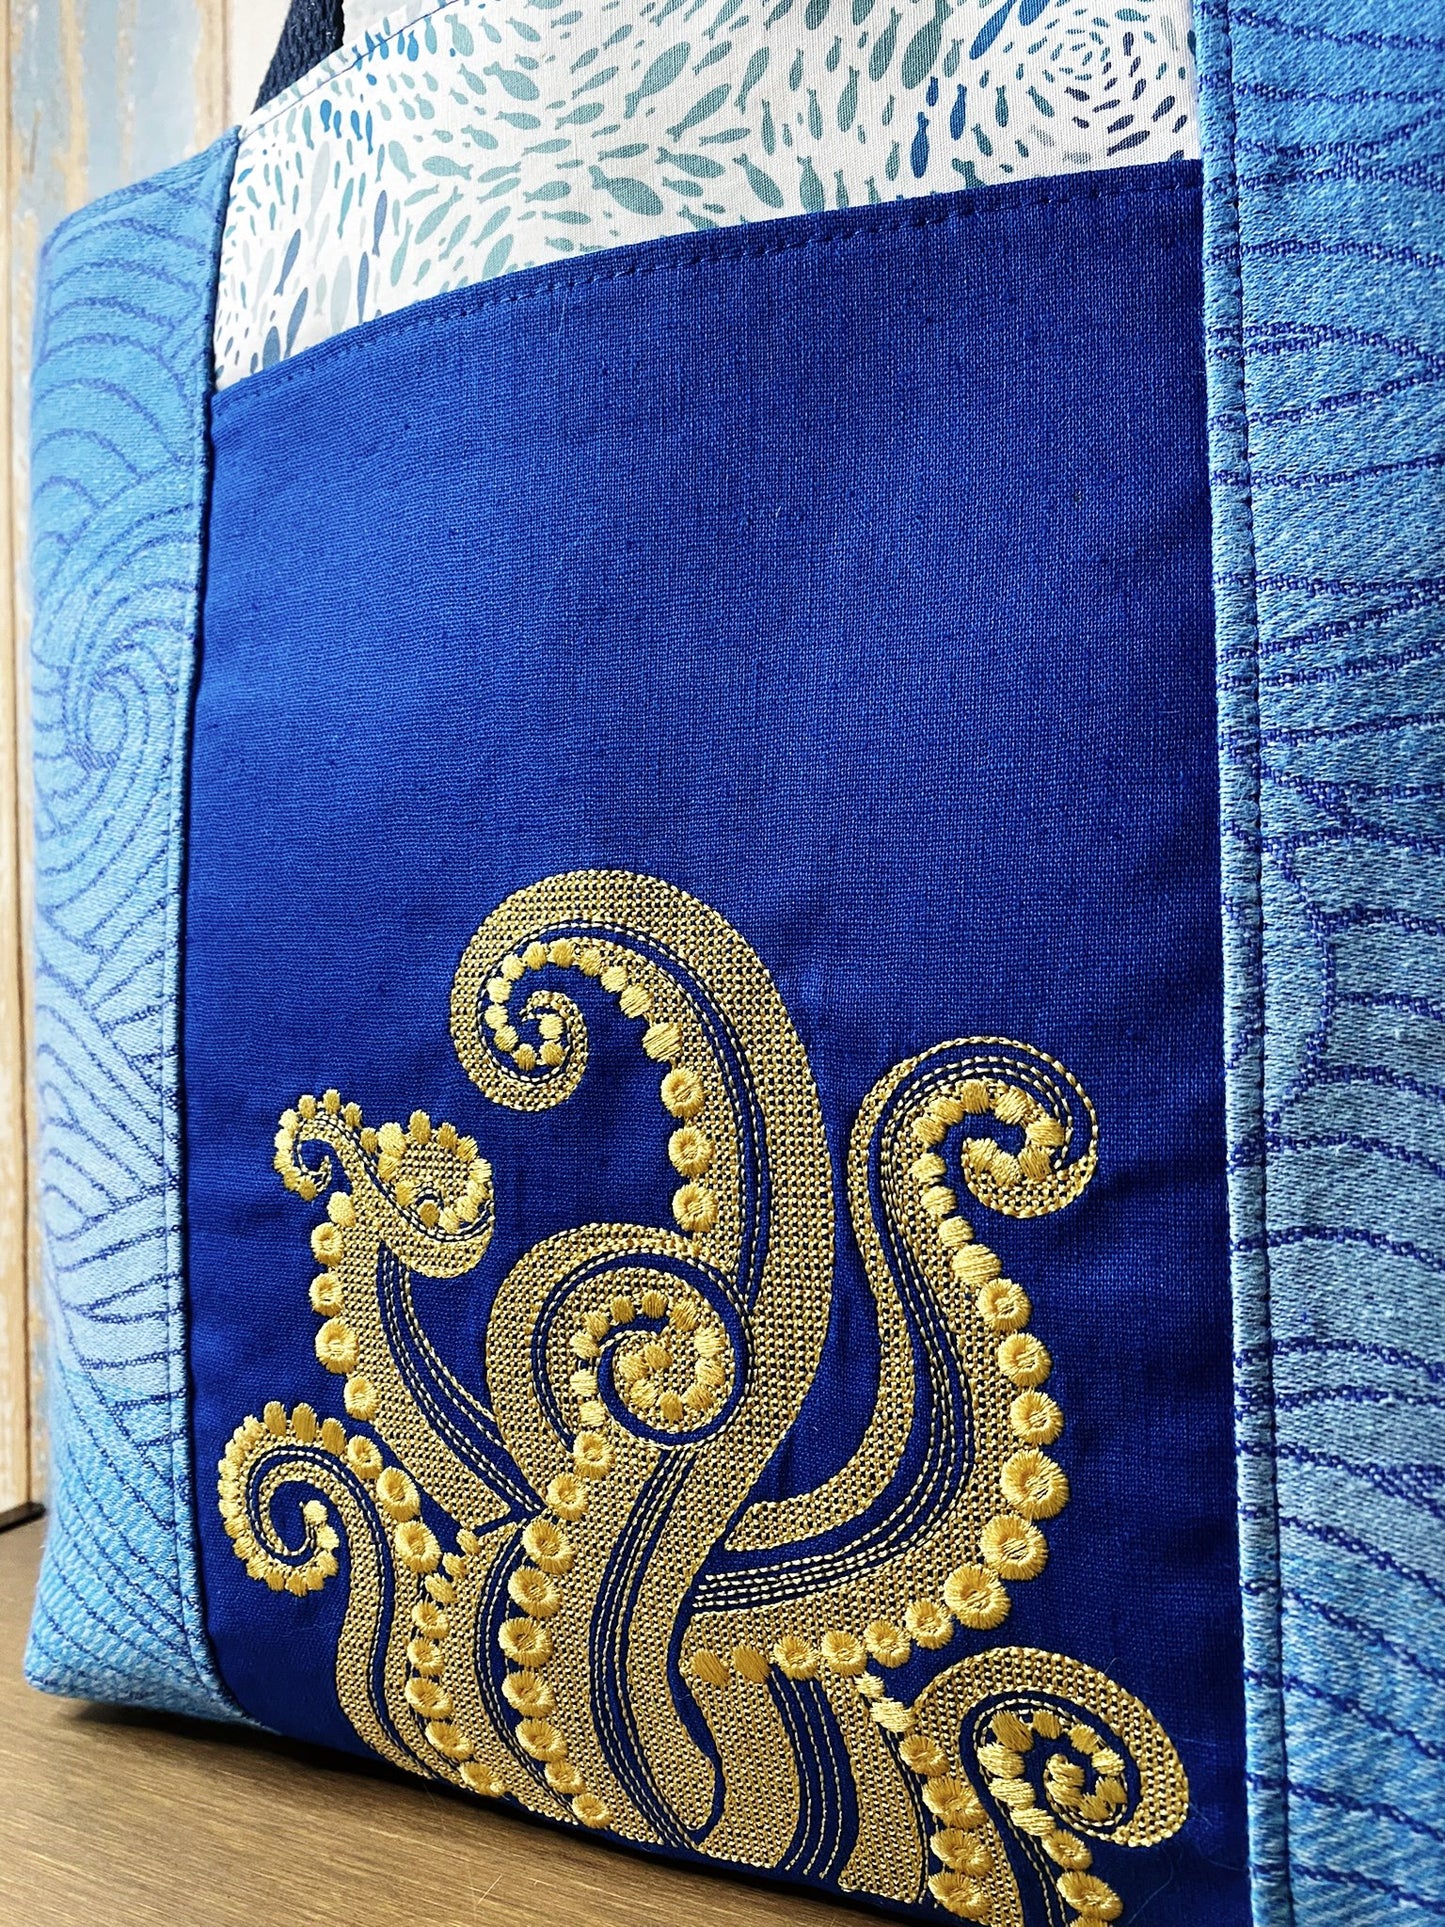 Opulent Octopus Book and Tote Bag